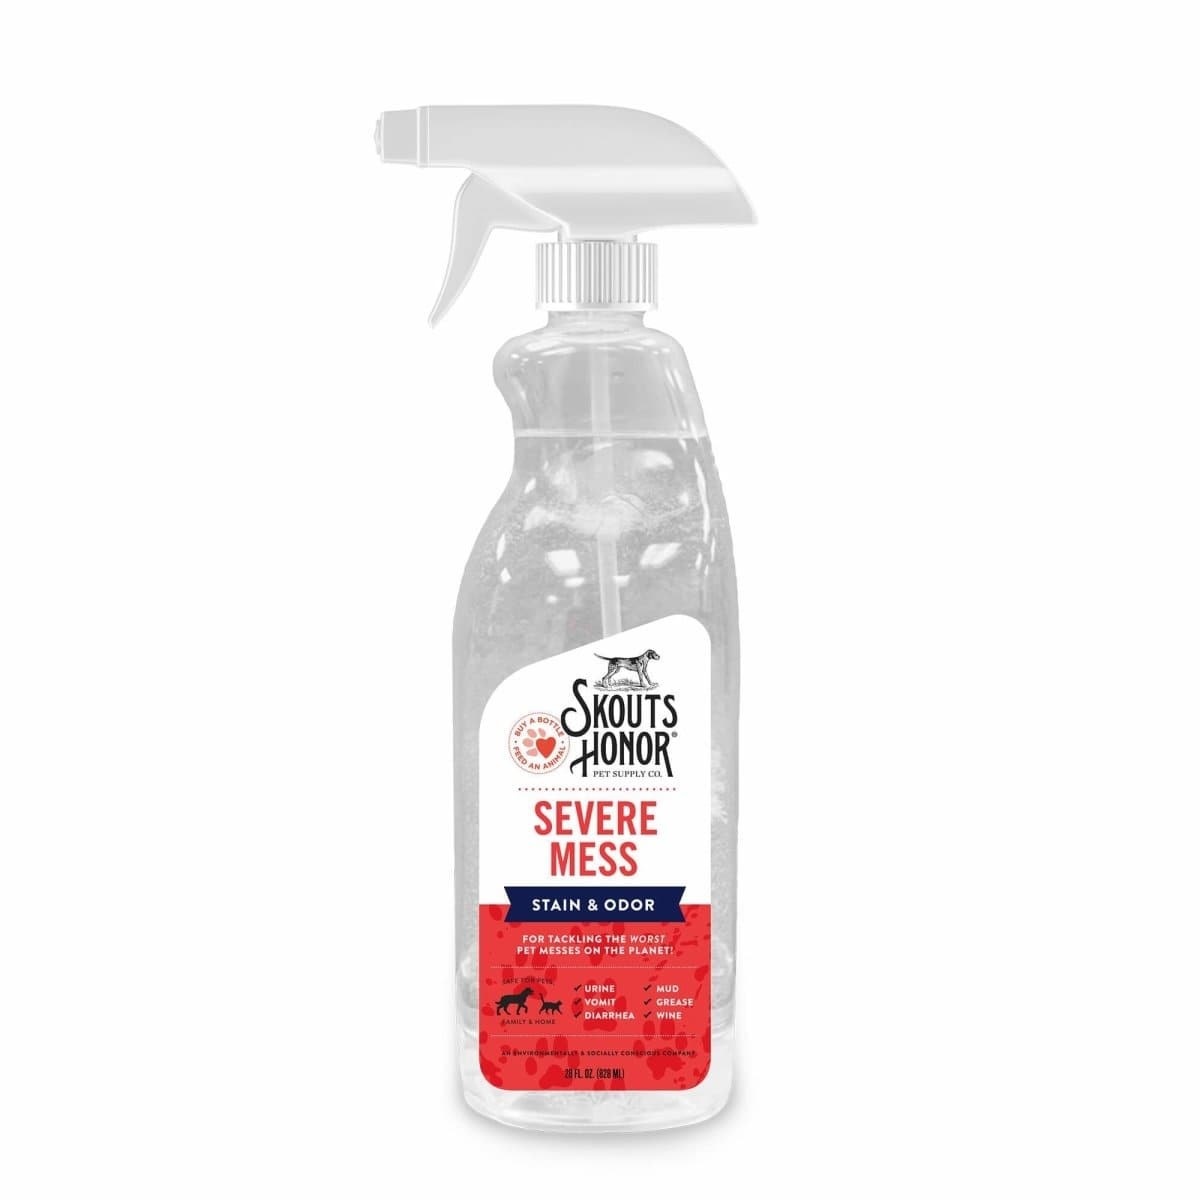 Skouts Honor Severe Mess Stain & Odor Spray Advanced - Dogs